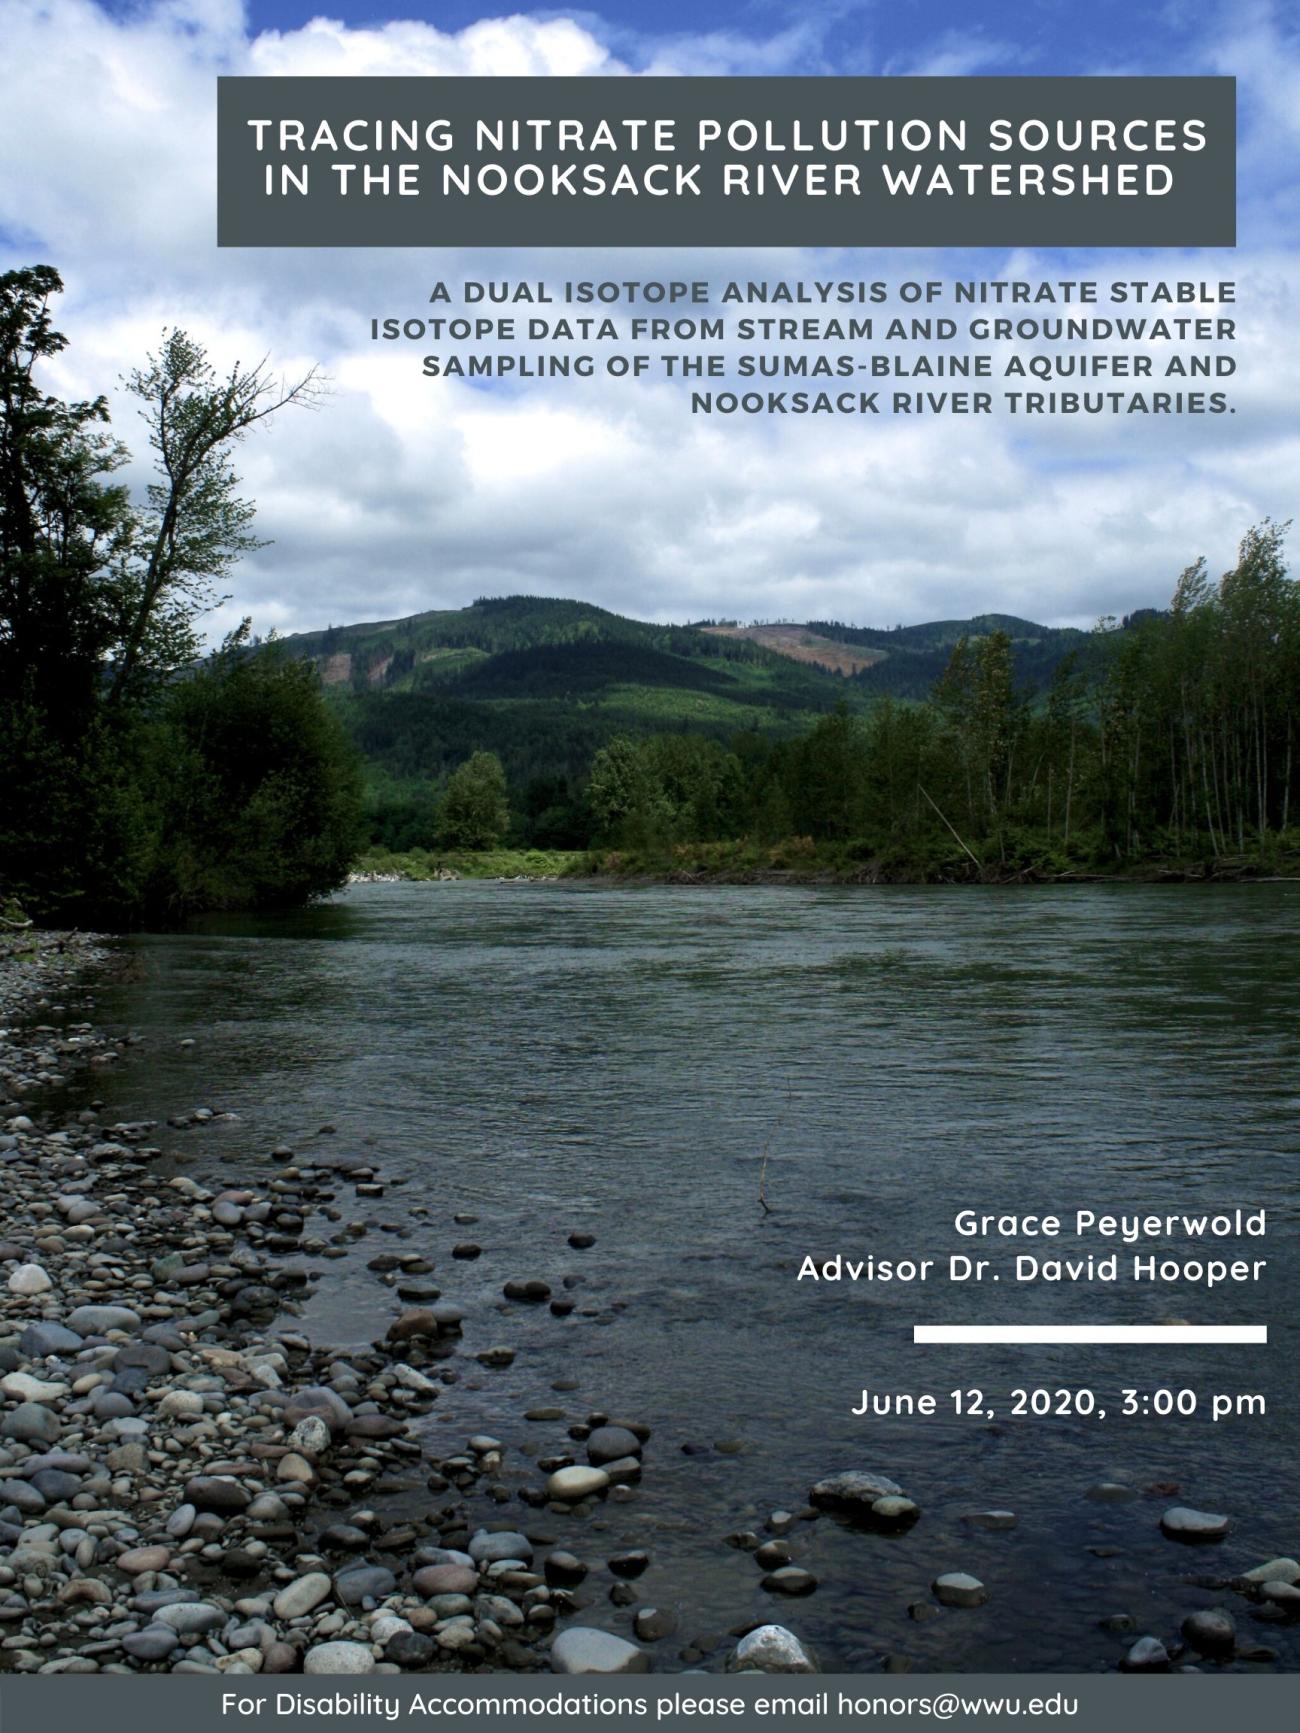 Image: A rocky river bed with green hills and a cloudy sky in the background. Text: "Tracing nitrate pollution sources in the Nooksack river watershed. A dual isotope analysis of nitrate stable isotope data from stream and groundwater sampling of the Sumas-Blaine aquifer and Nooksack river tributaries. Grace Peyerwold, Advisor Dr. David Hooper. June 12, 2020, 3:00 pm. For Disability Accommodations please email honors@wwu.edu."